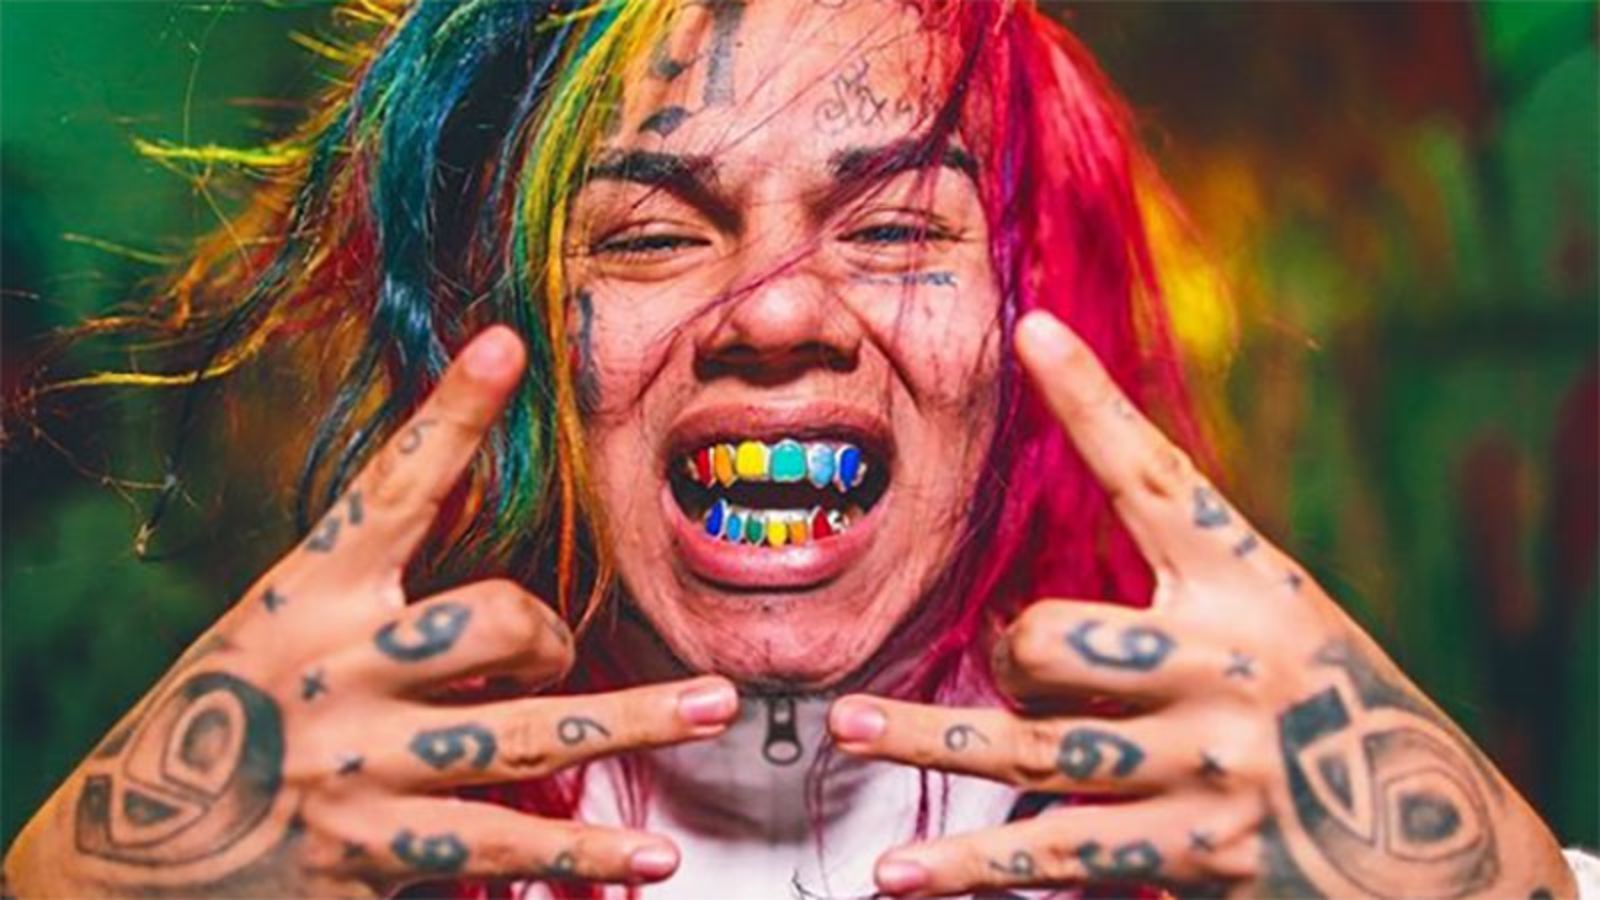 BREAKING NEWS Rapper Tekashi 69 Has Died Of Apparent LIGMA